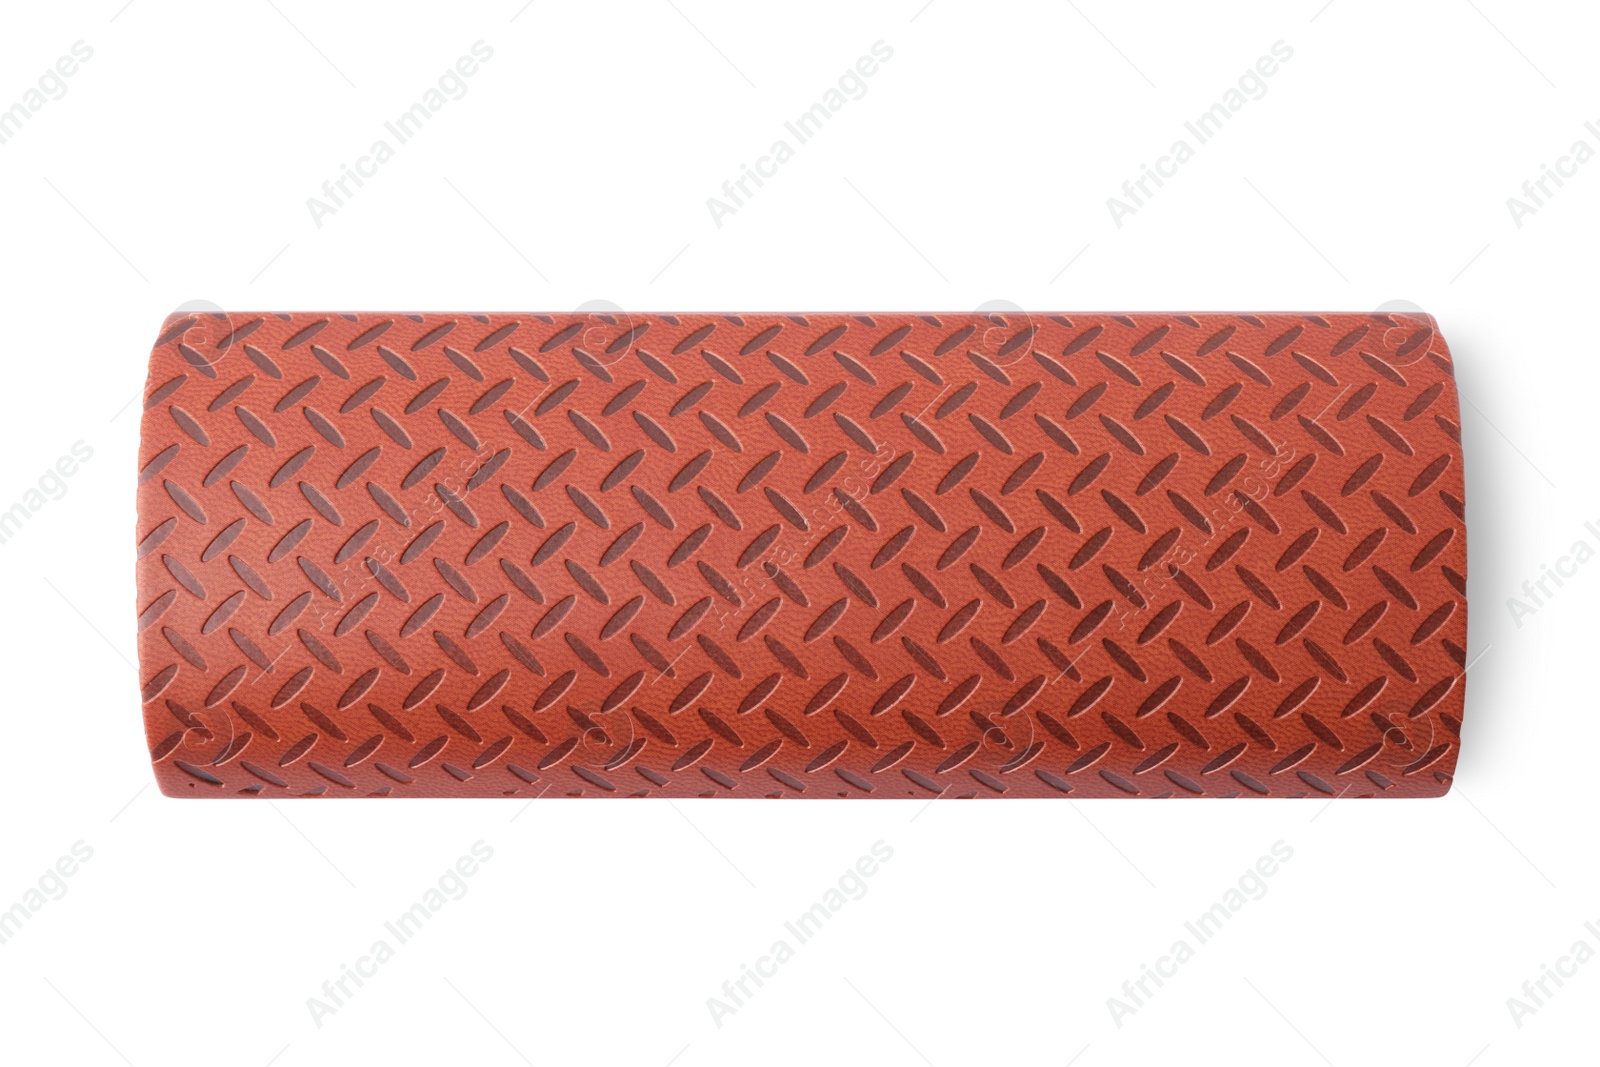 Photo of Brown leather glasses case isolated on white